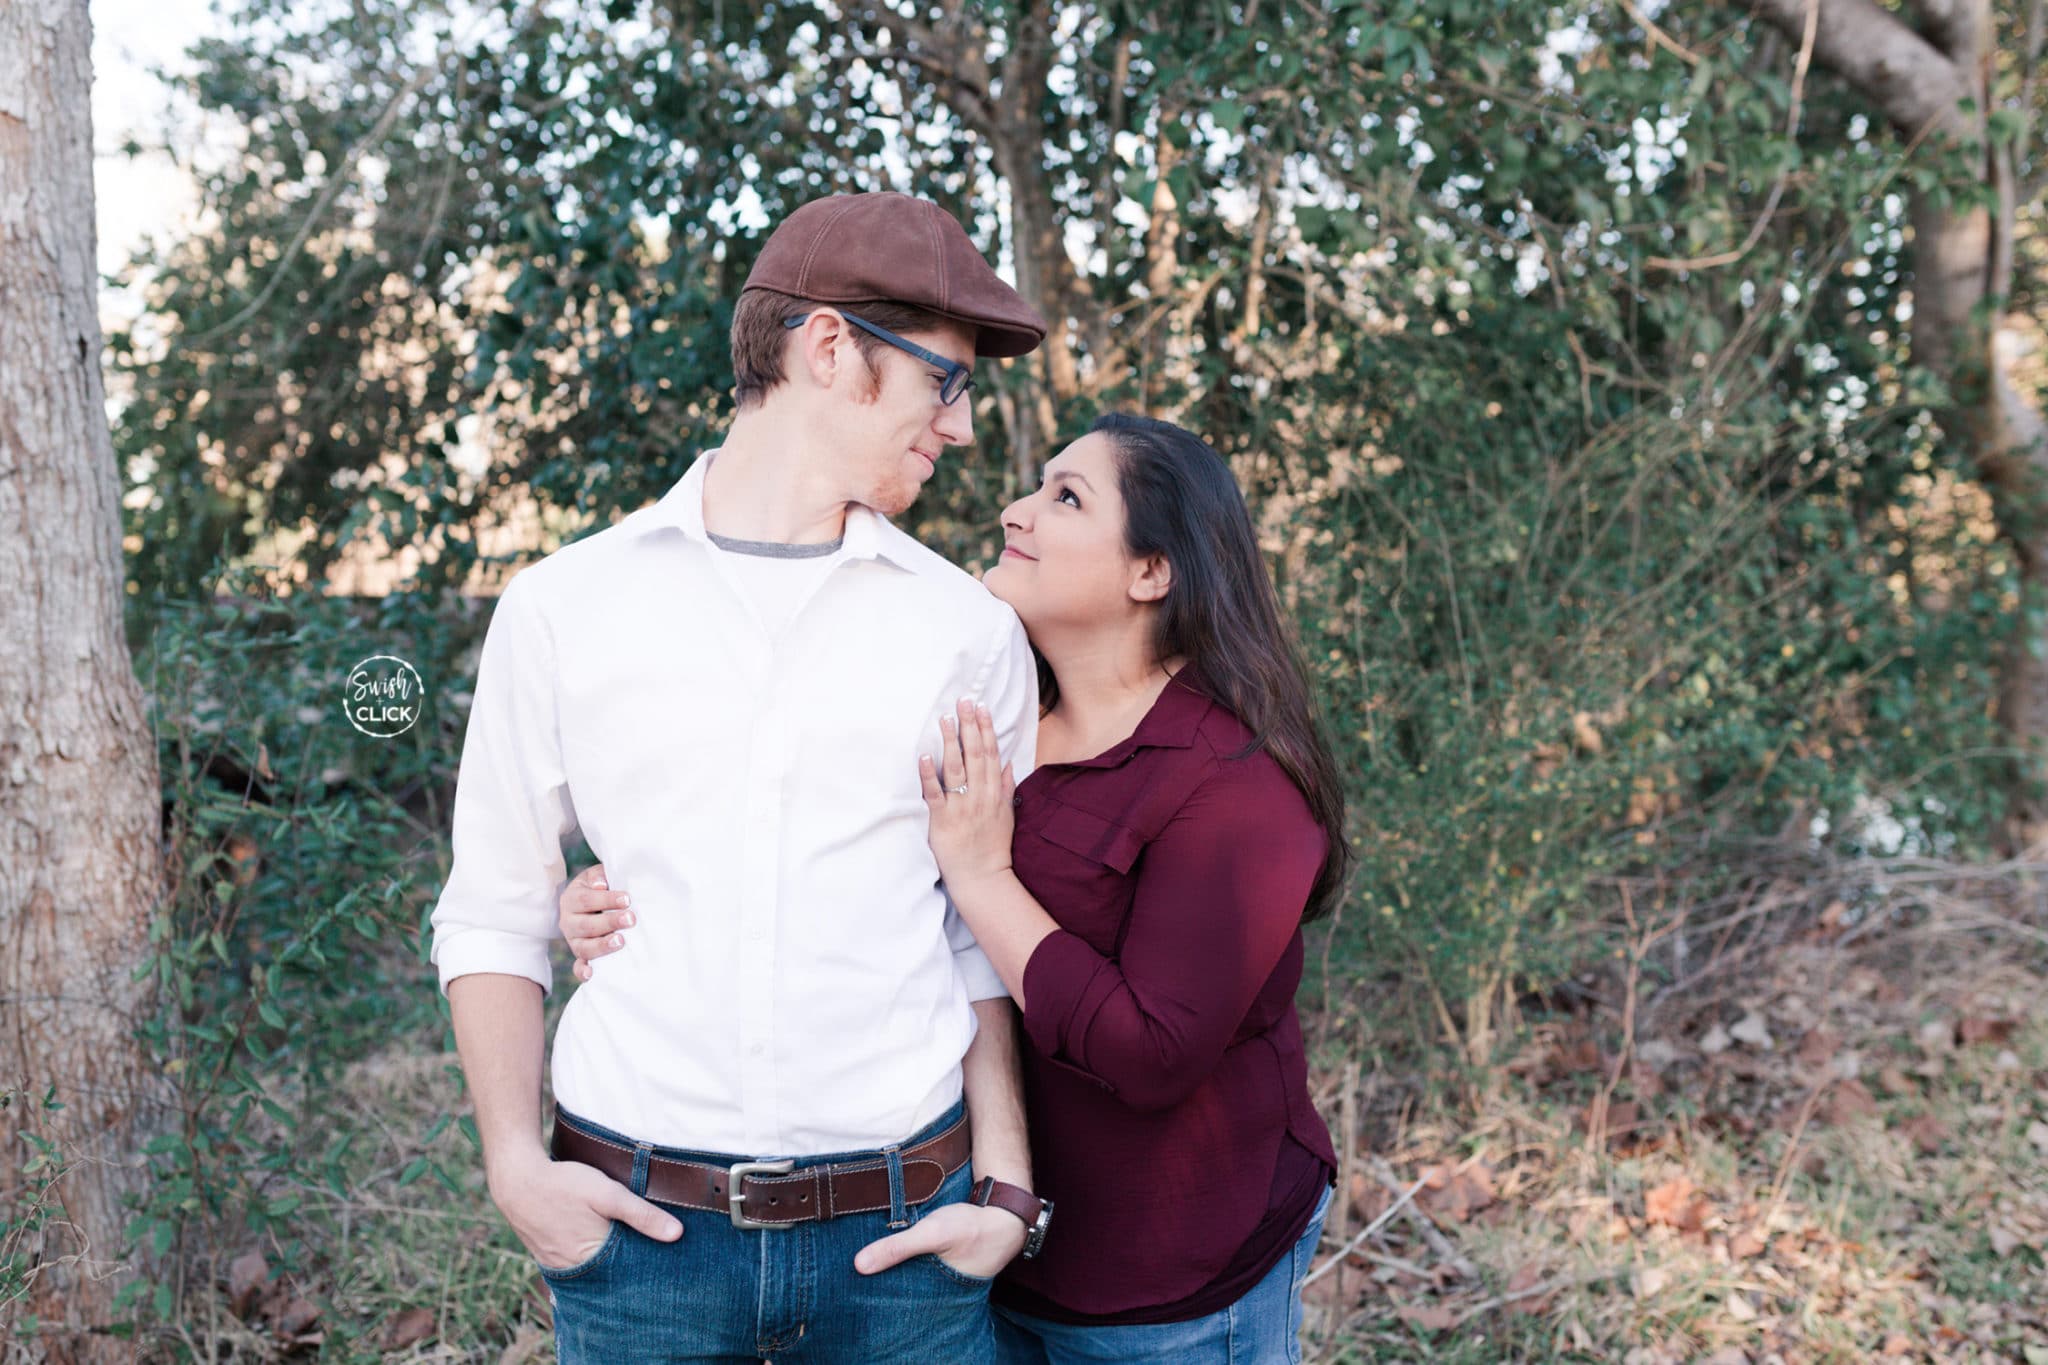 awesome engagement photos at a park in Houston Texas by Swish and Click